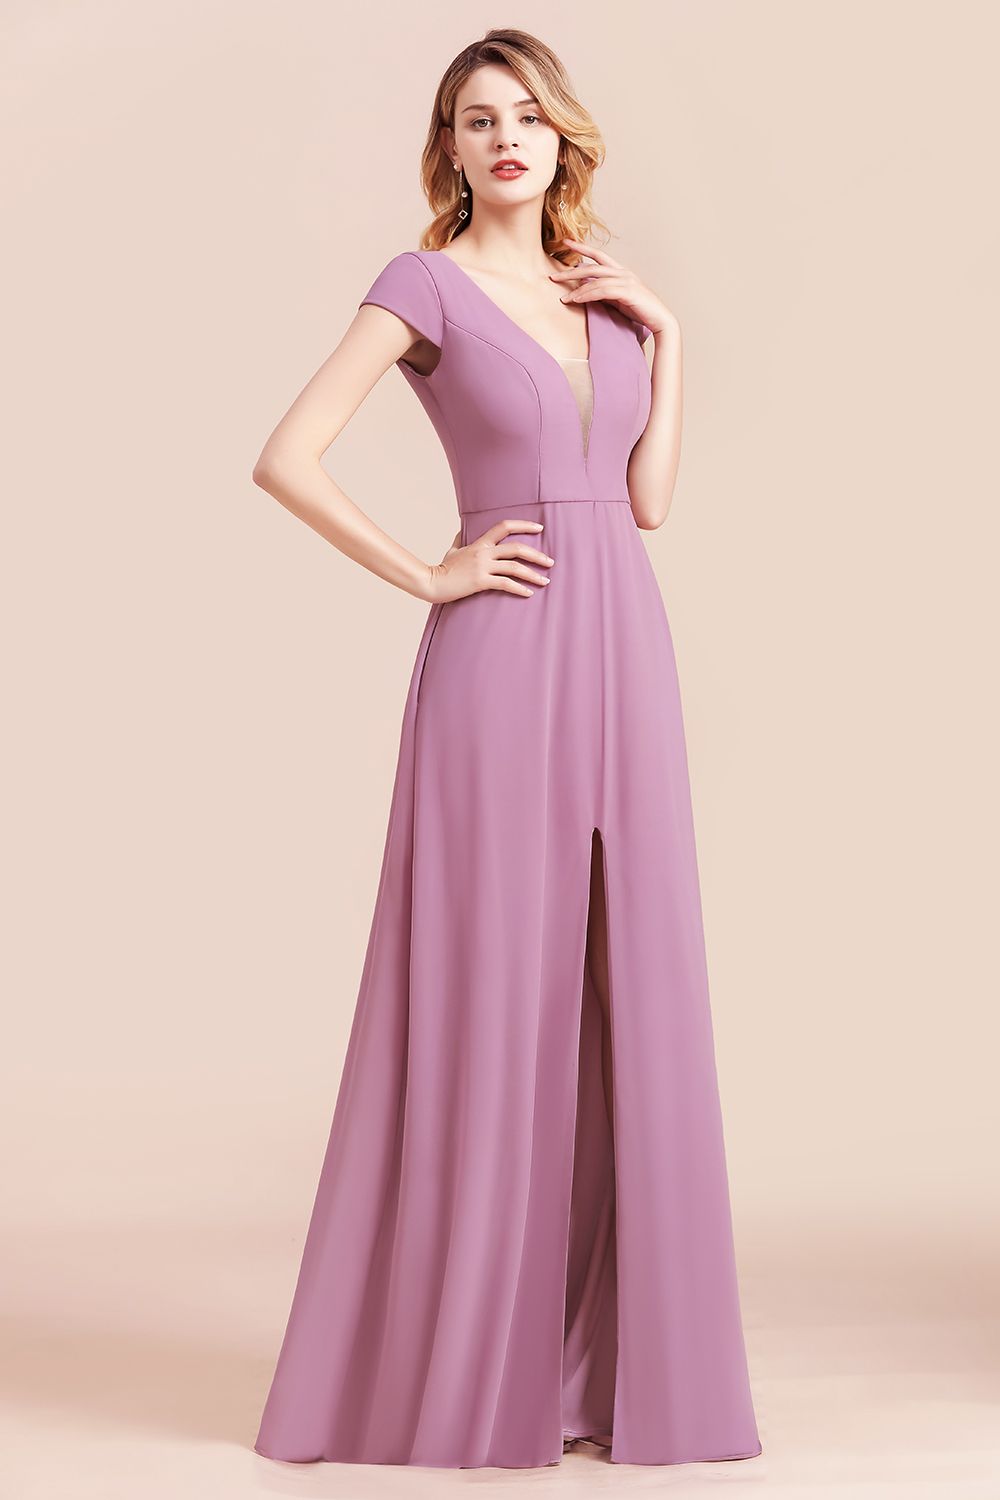 Load image into Gallery viewer, A-Line V-neck Chiffon Front Slit Long Bridesmaid Dress Wth Pockets-BIZTUNNEL
